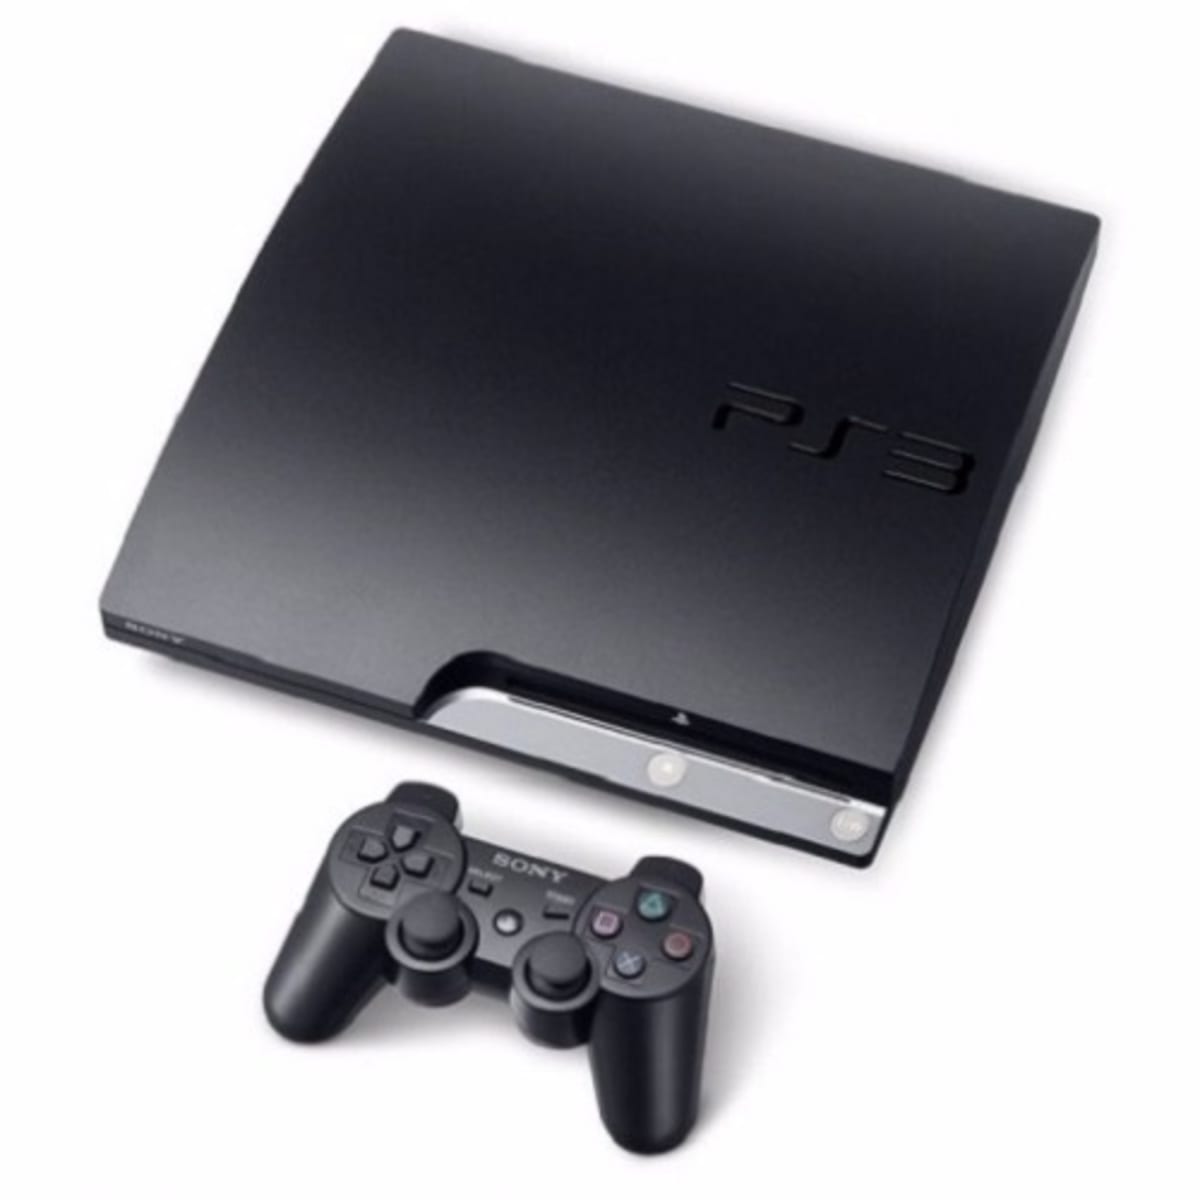 Ps3 Slim With 10 Including Fifa17 And Pes17 | Konga Online Shopping